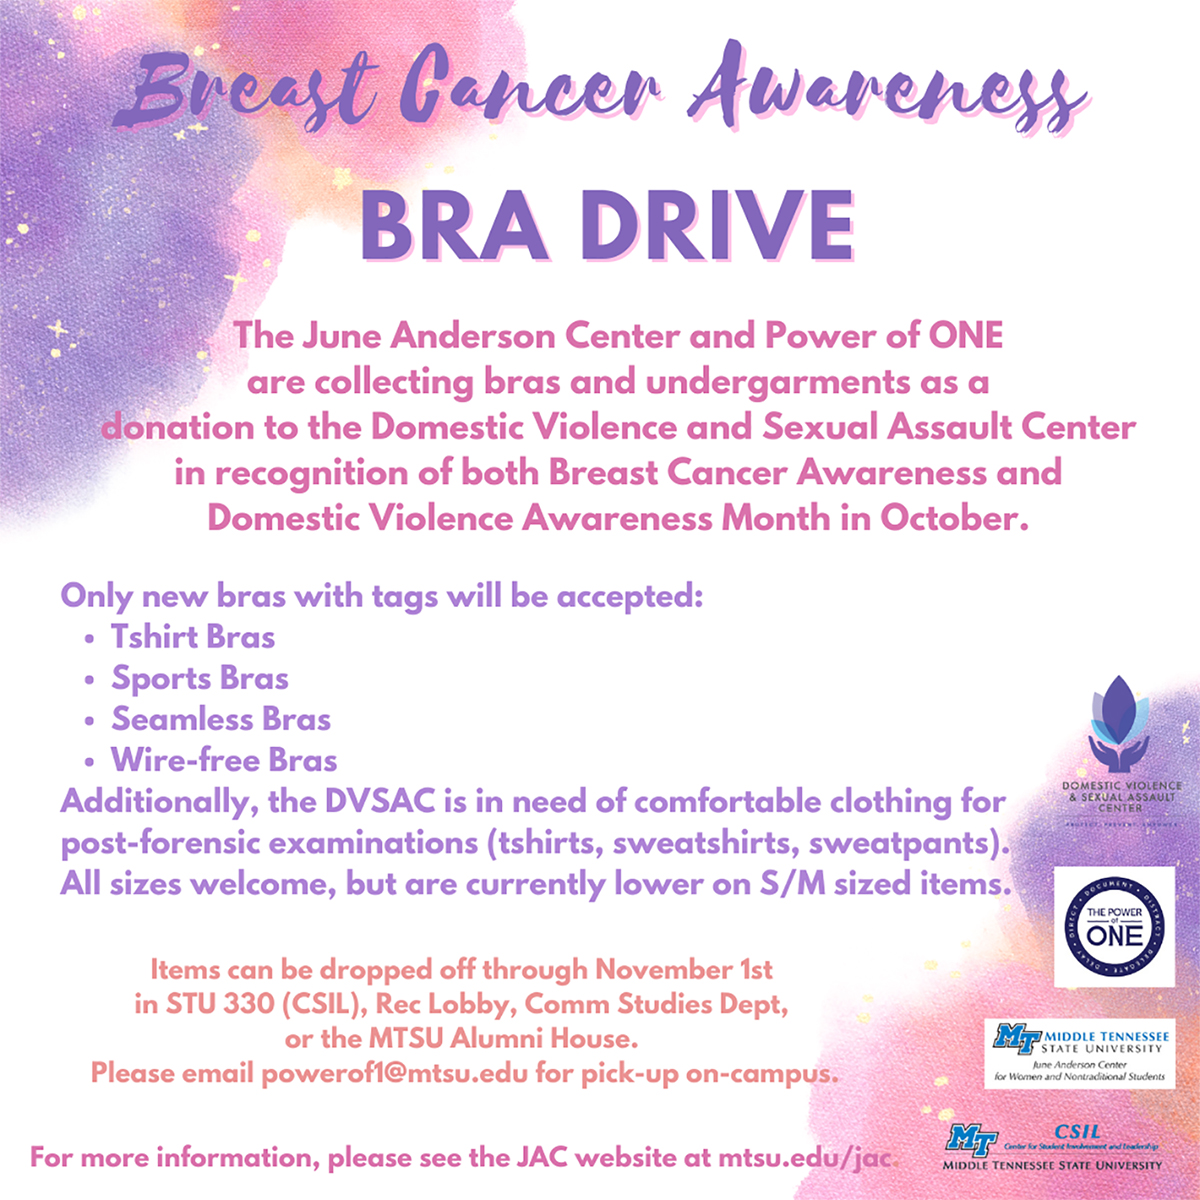 MTSU's June Anderson Center collecting bras, comfy clothing for